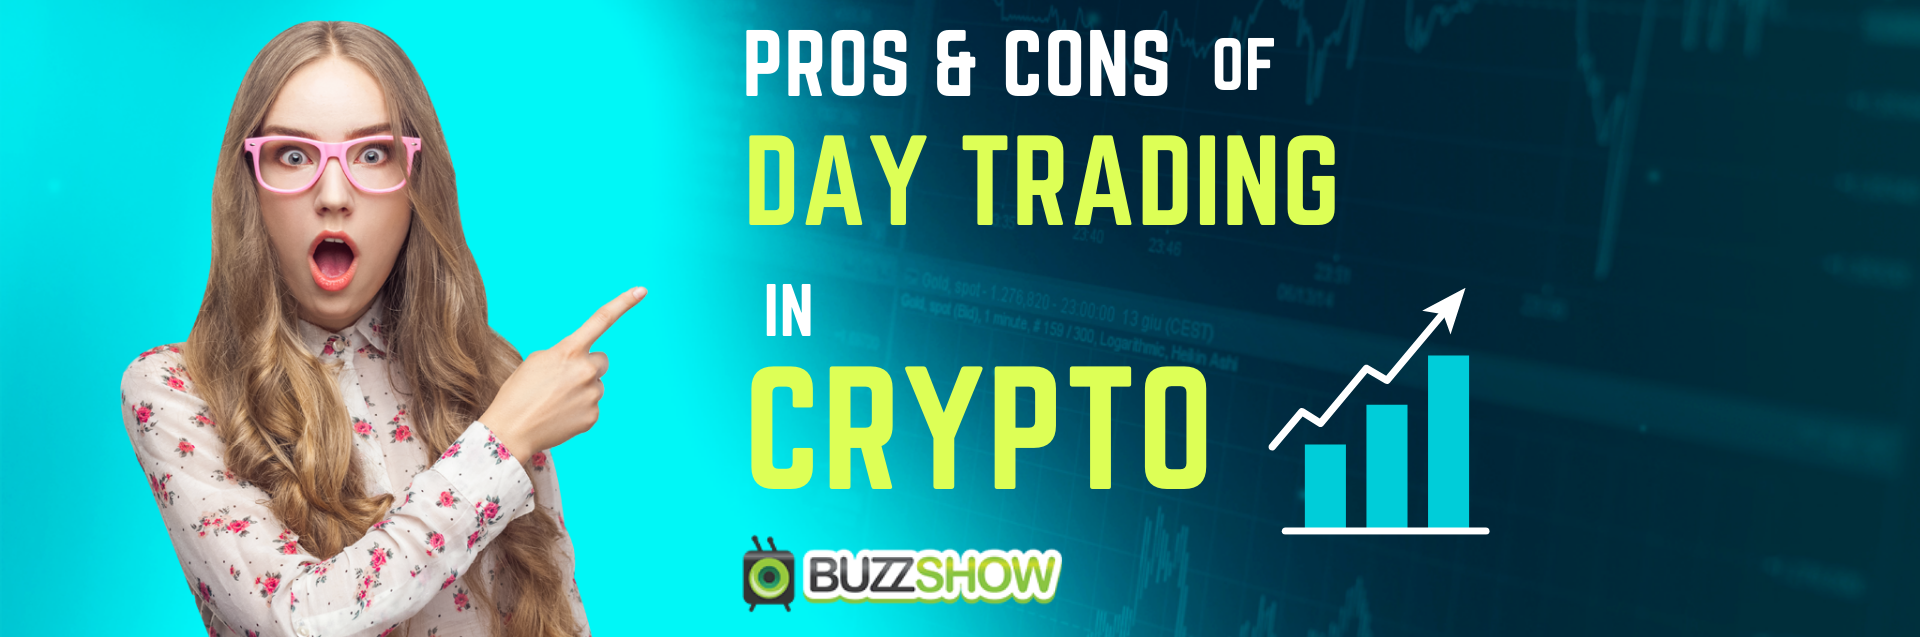 Crypto Day Trading Pros and Cons